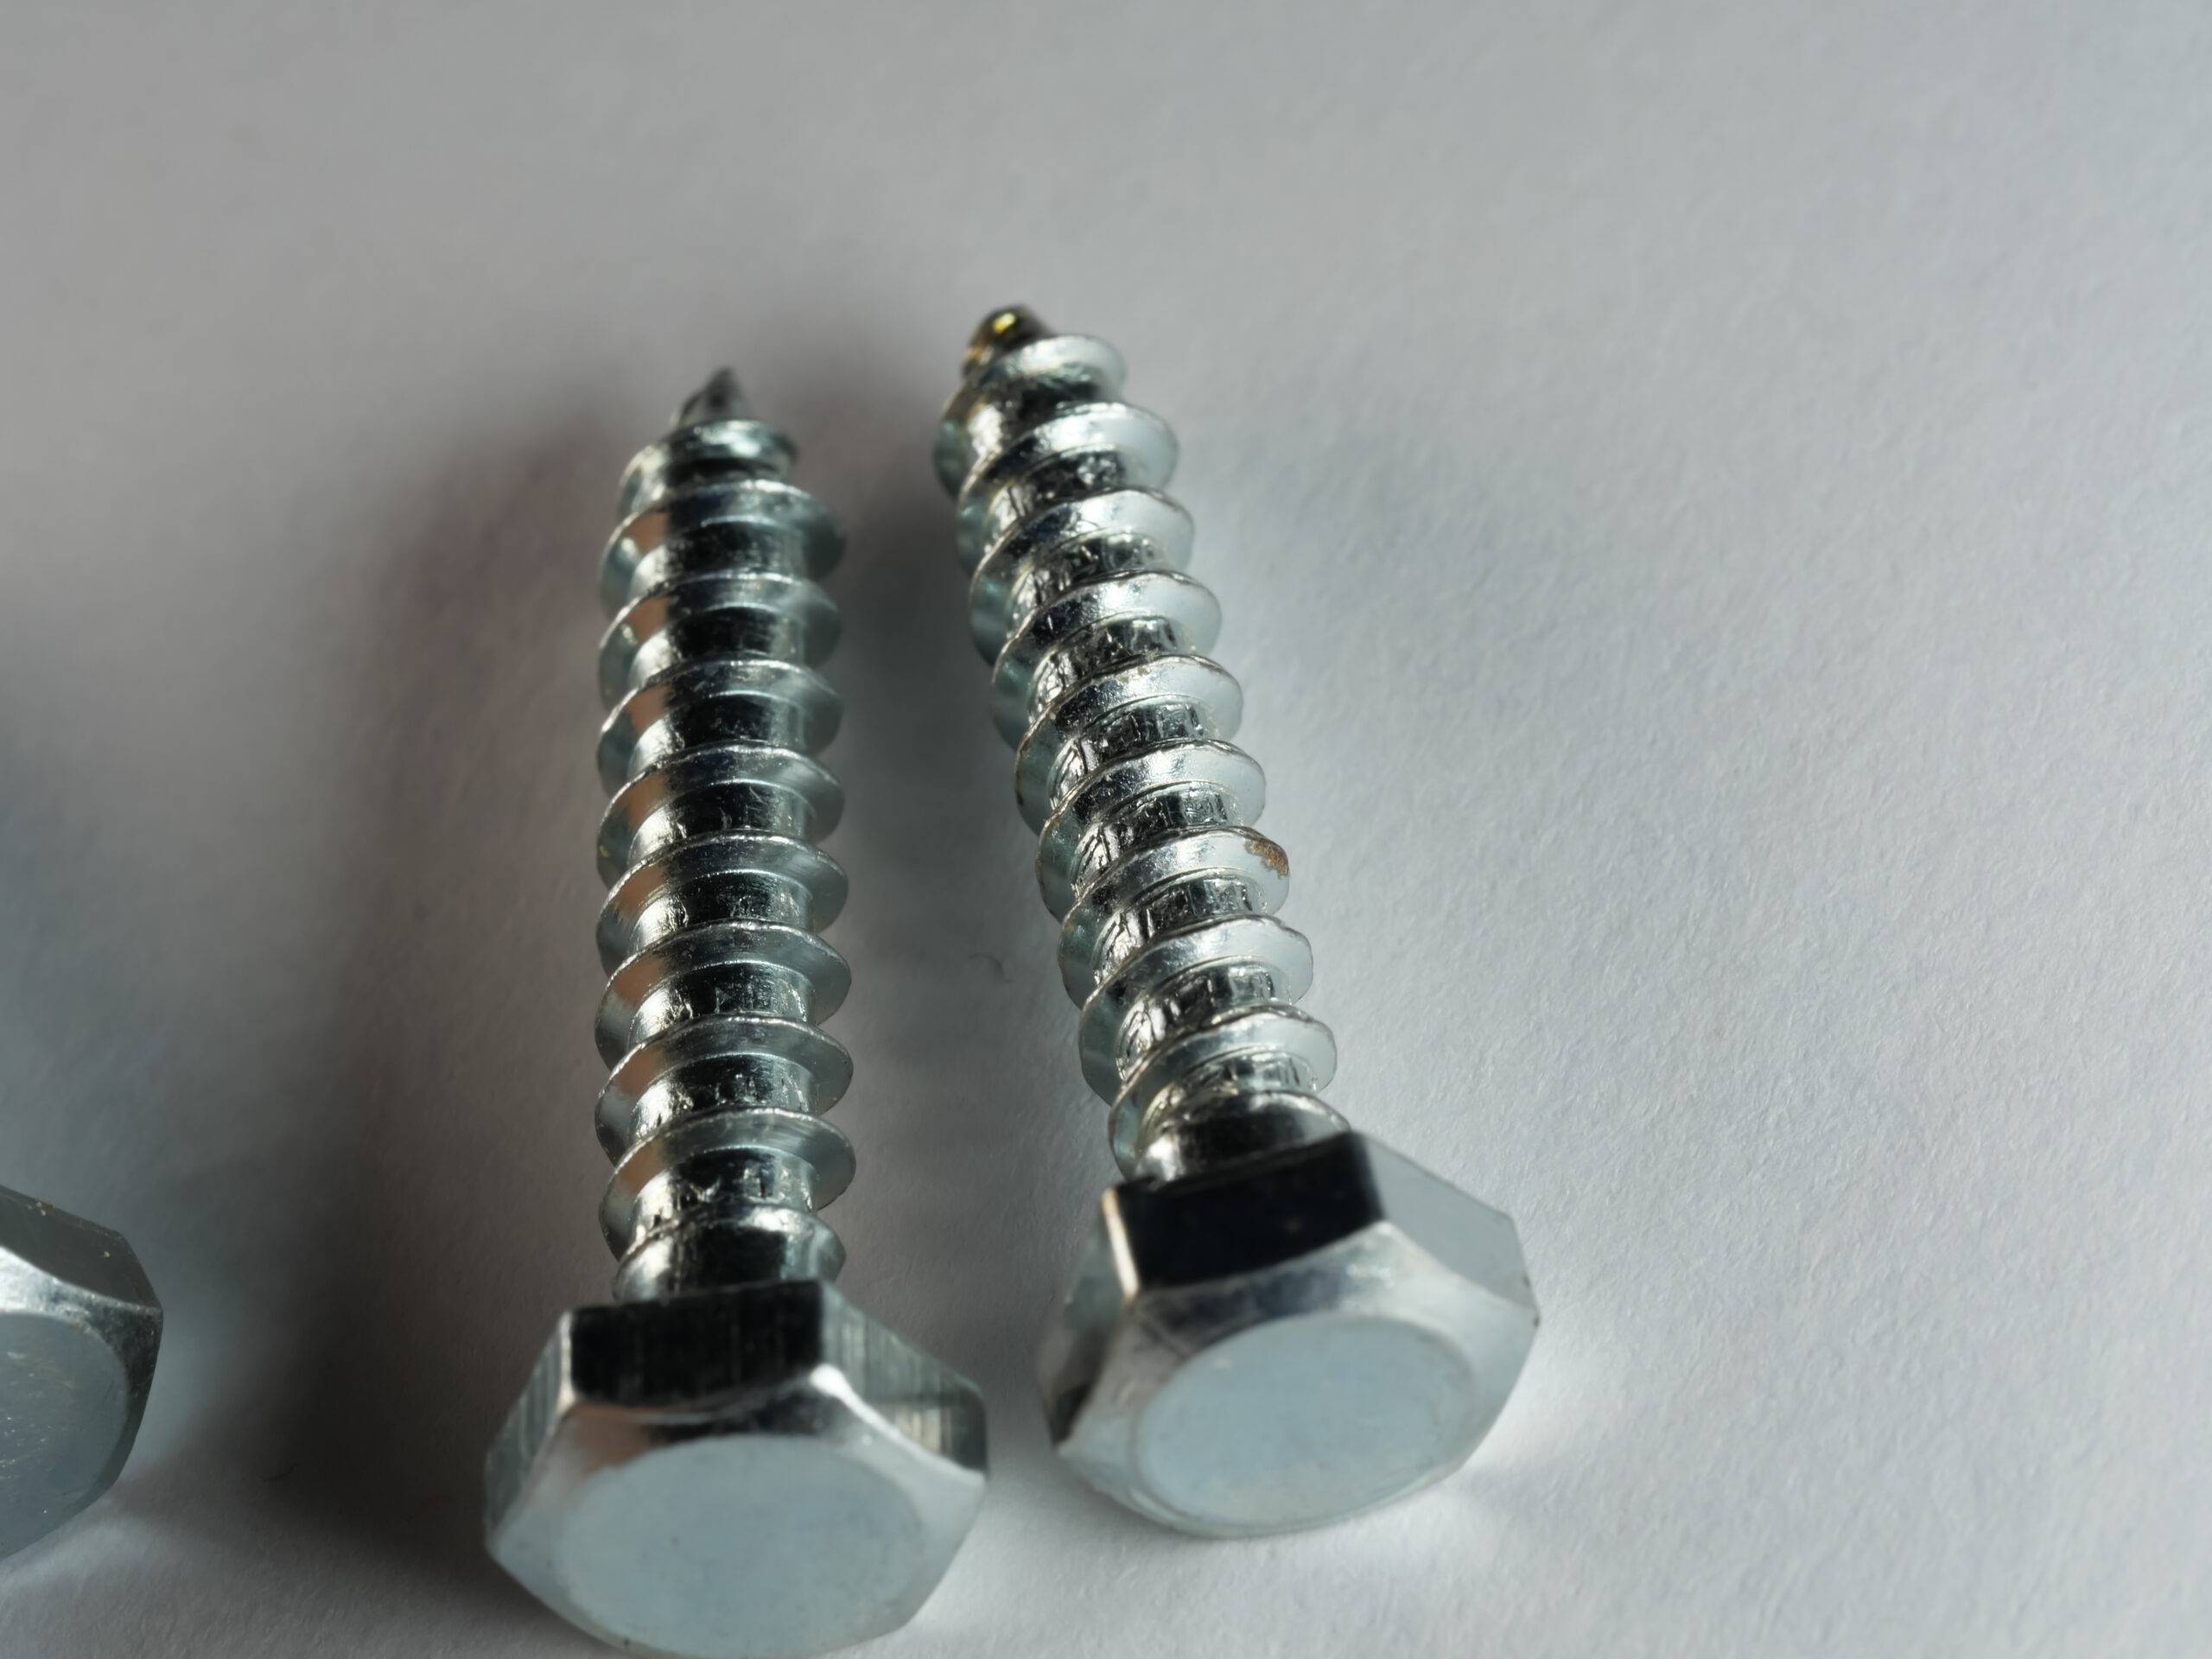 A high angle shot of lag screws on a gray surface.